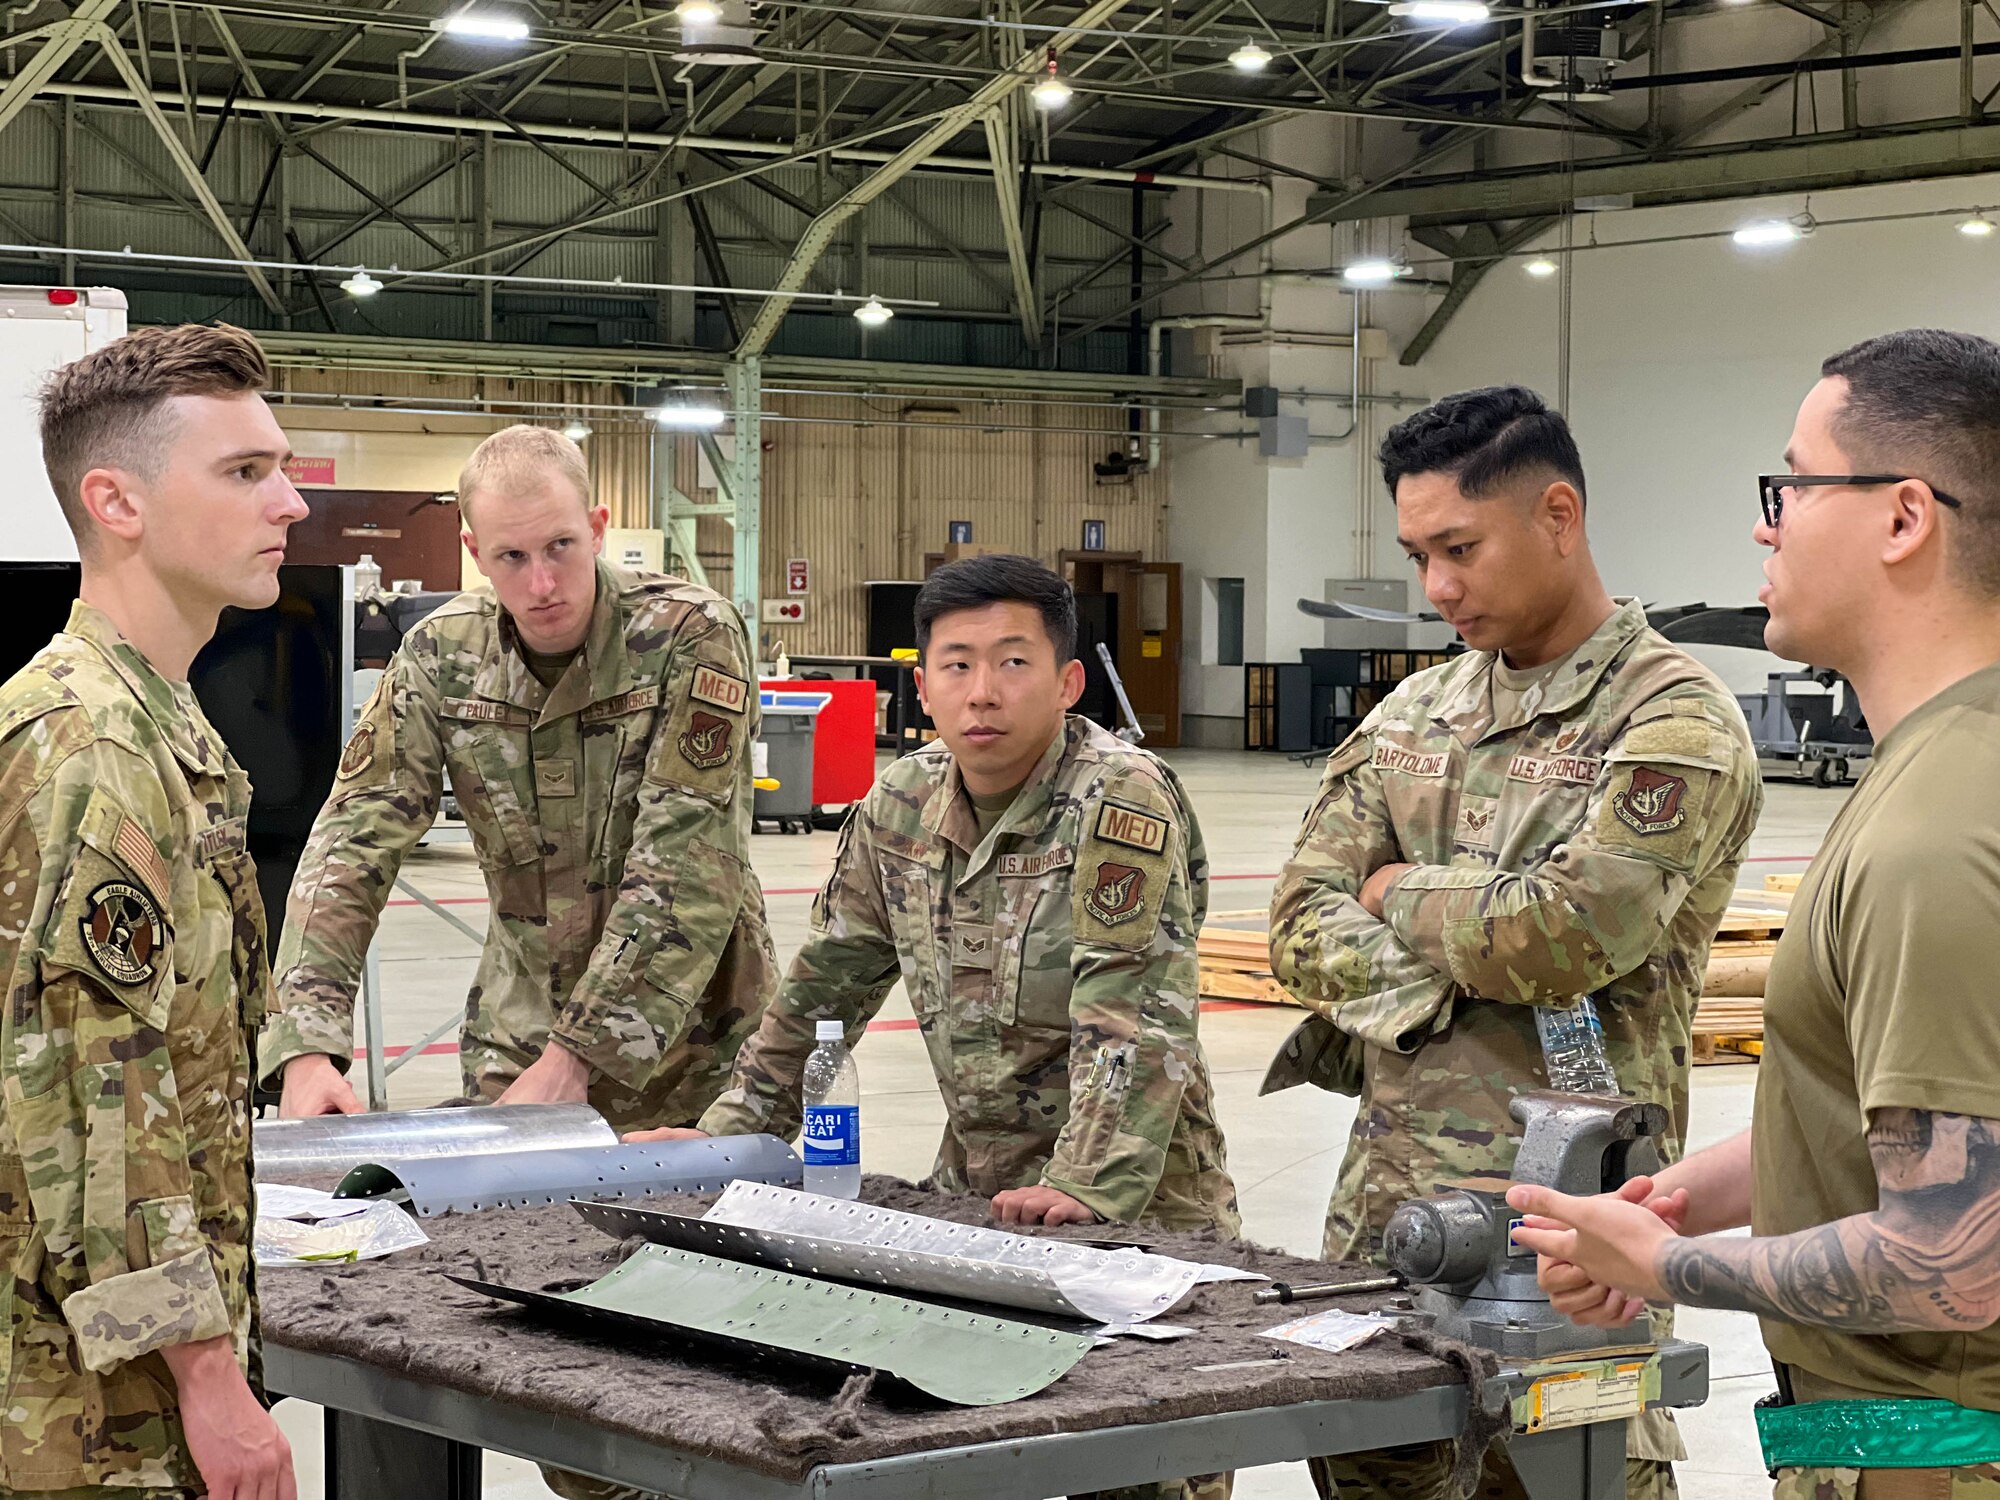 Tech. Sgt. Lawrence Reyes, 374th Maintenance Squadron aircraft structural maintenance shift supervisor, briefs four Airmen about aircraft structural maintenance and sheet metal.